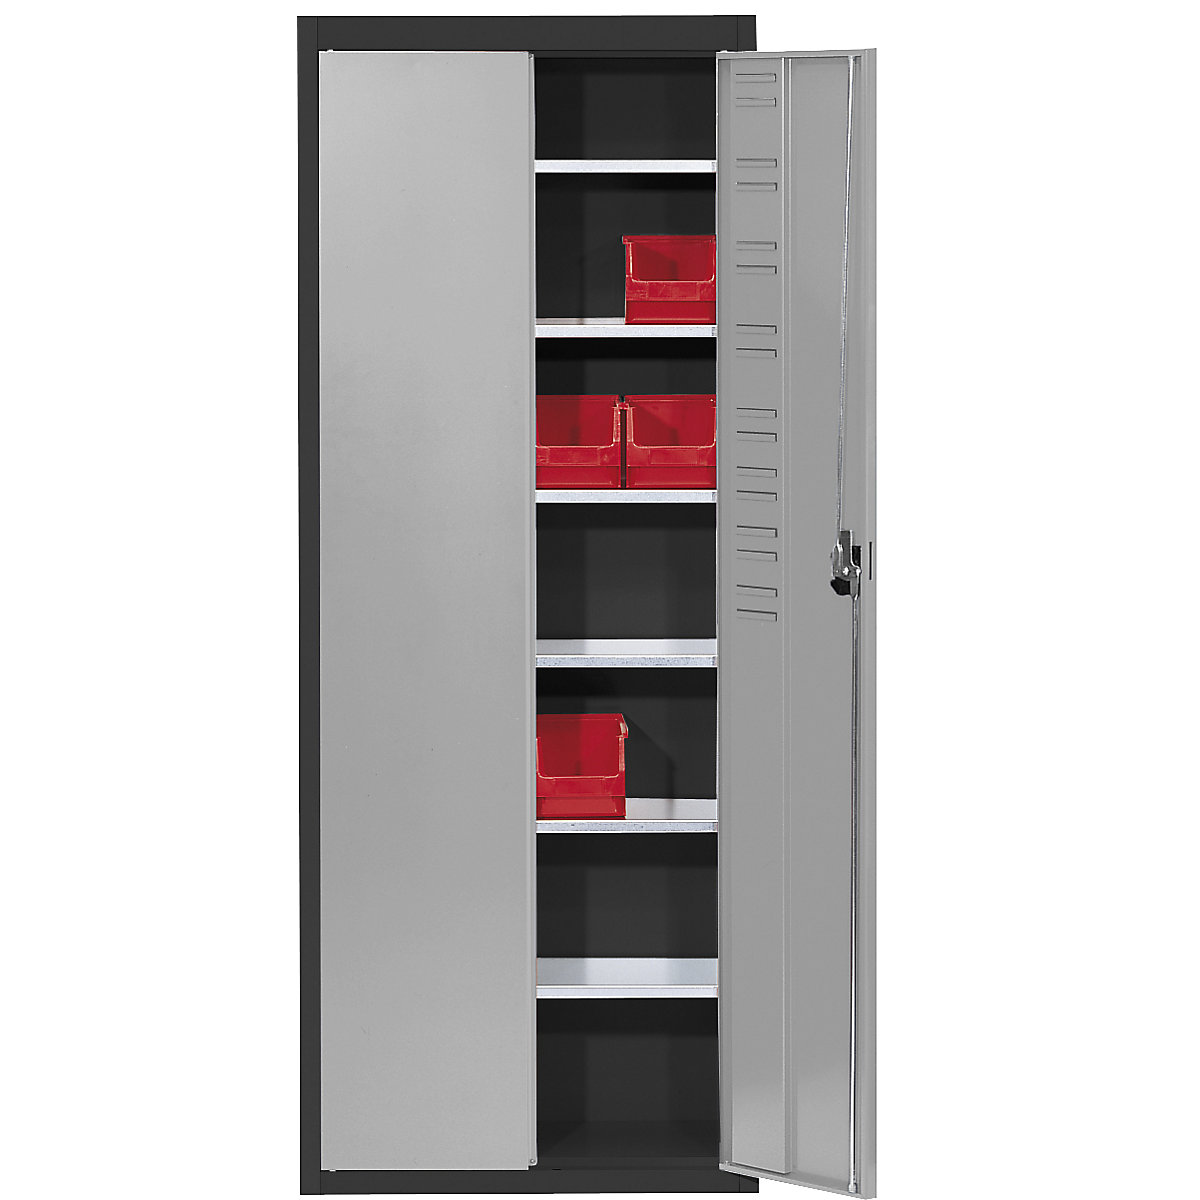 Storage cupboard, without open fronted storage bins – mauser, HxWxD 1740 x 680 x 280 mm, two-colour, black body, grey doors, 3+ items-6